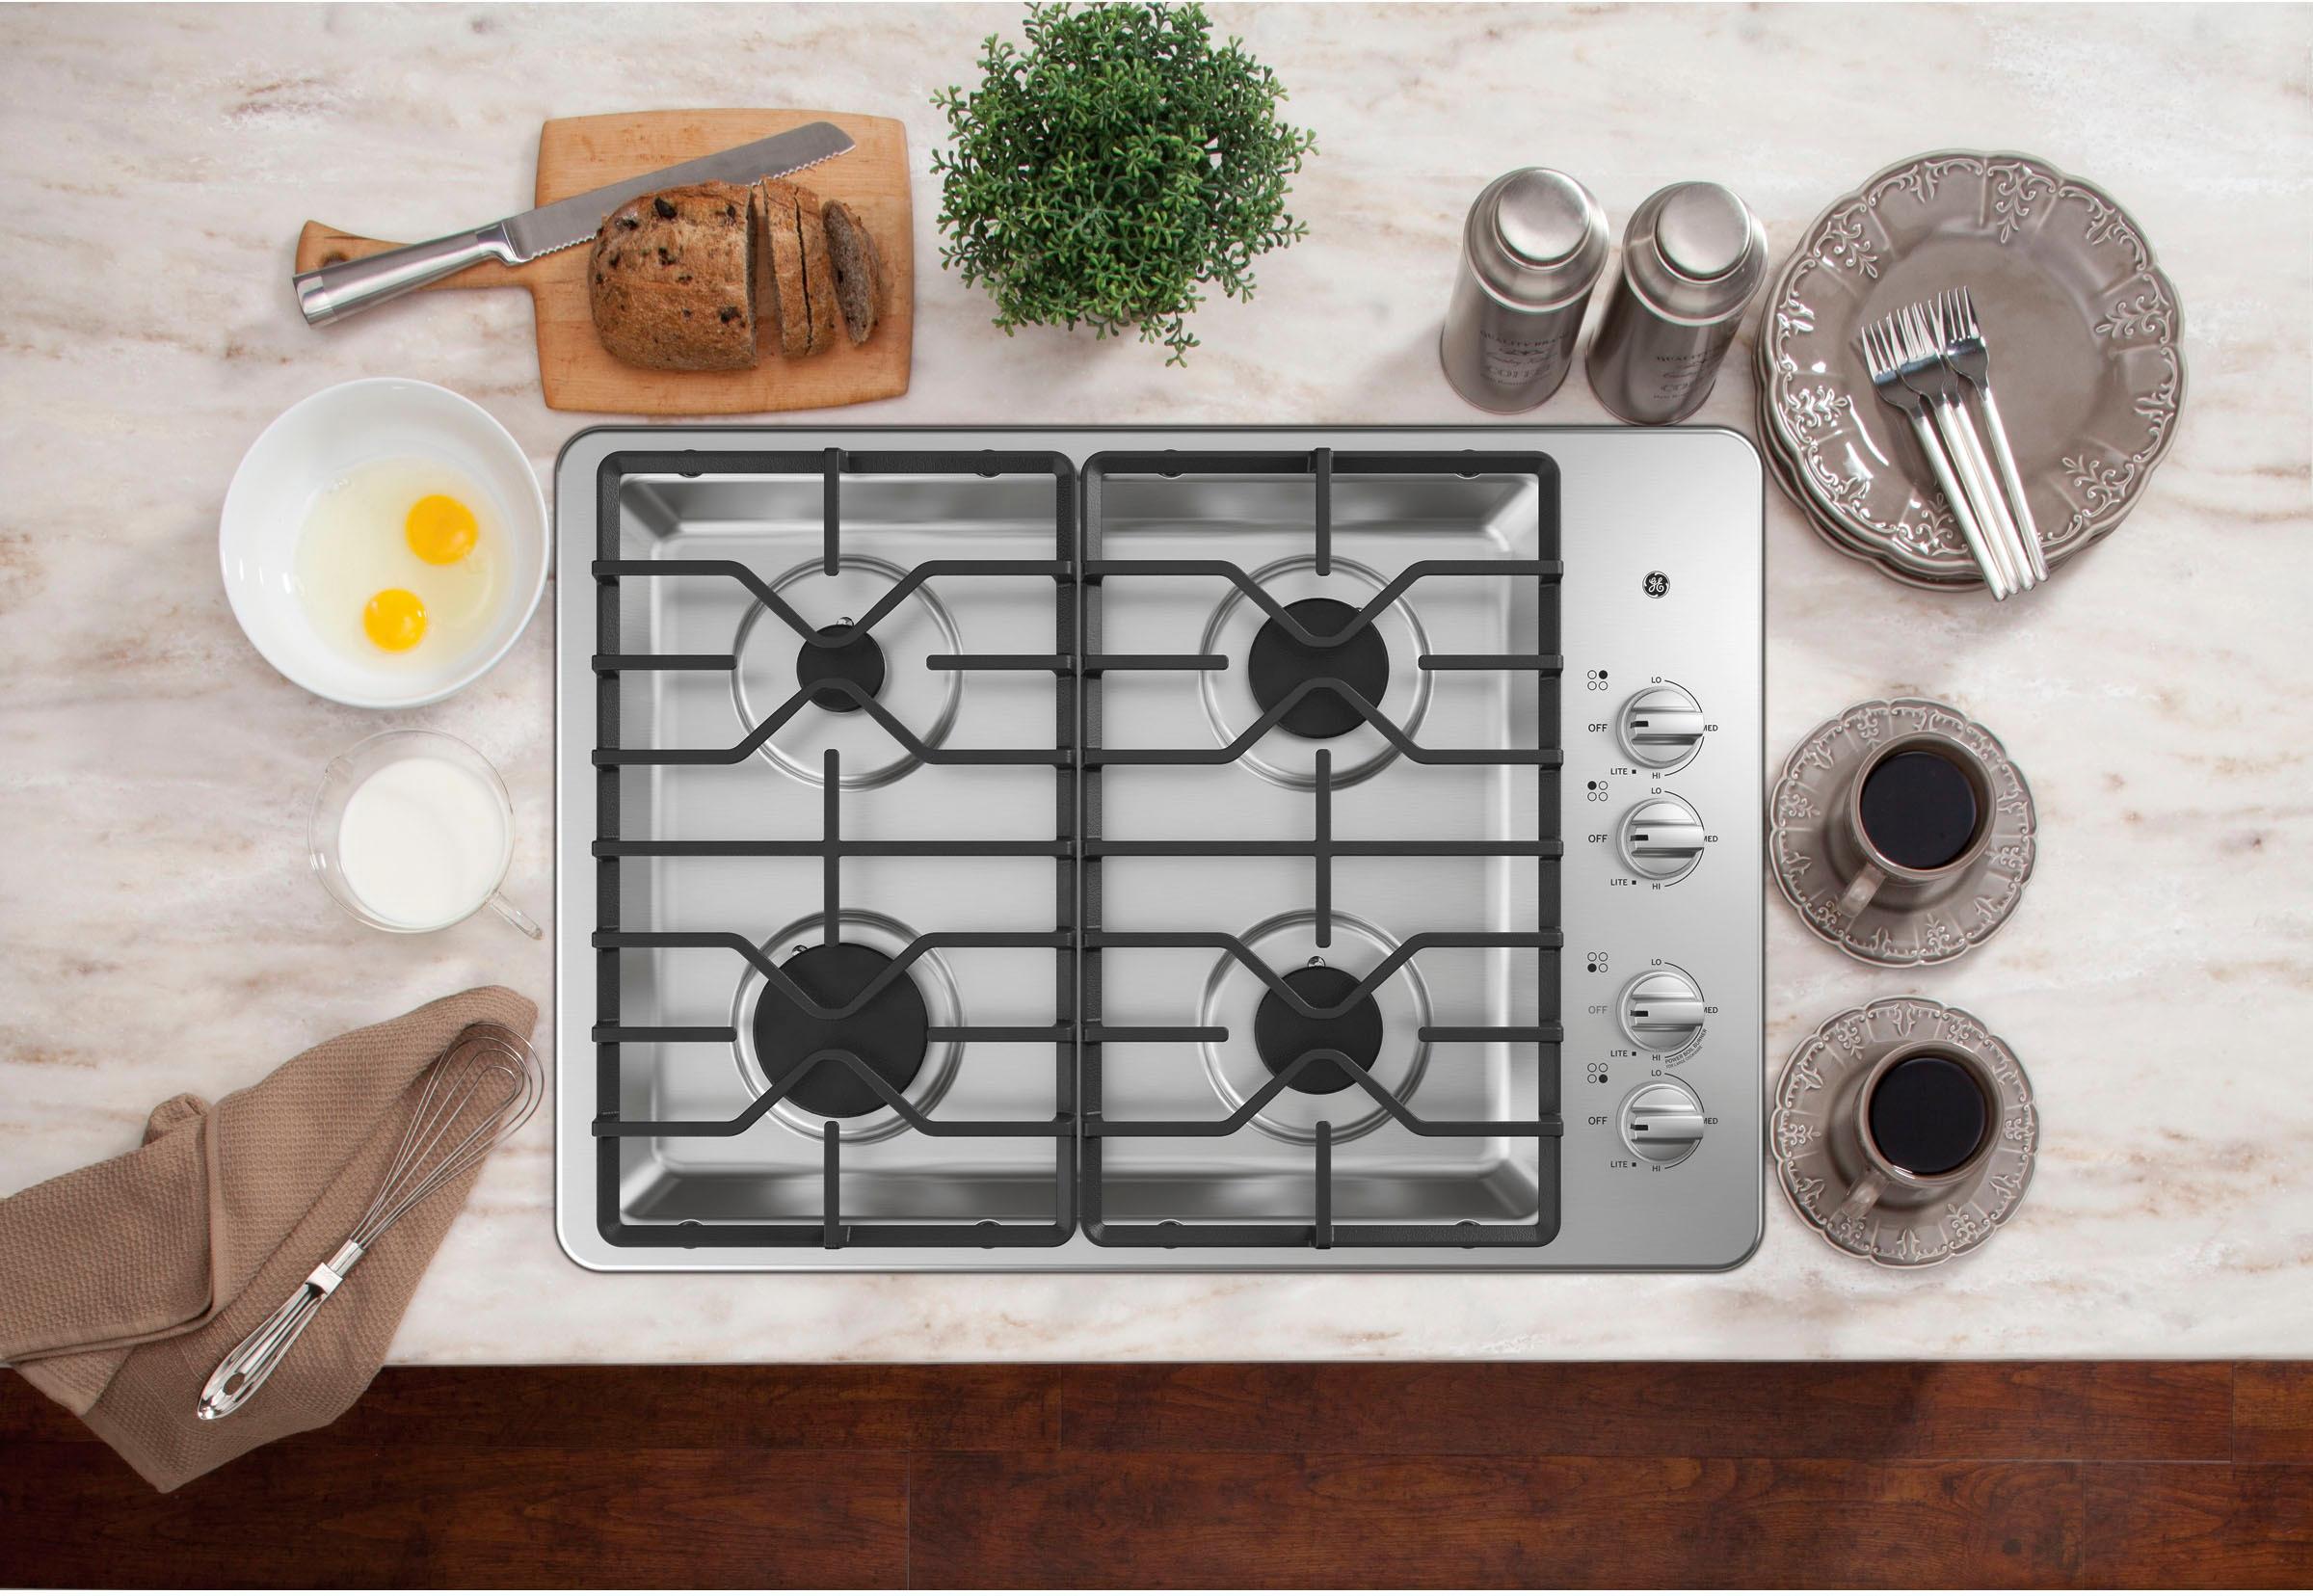 Angle View: LG - 30" Built-In Electric Cooktop with 5 Elements and Warming Zone - Black